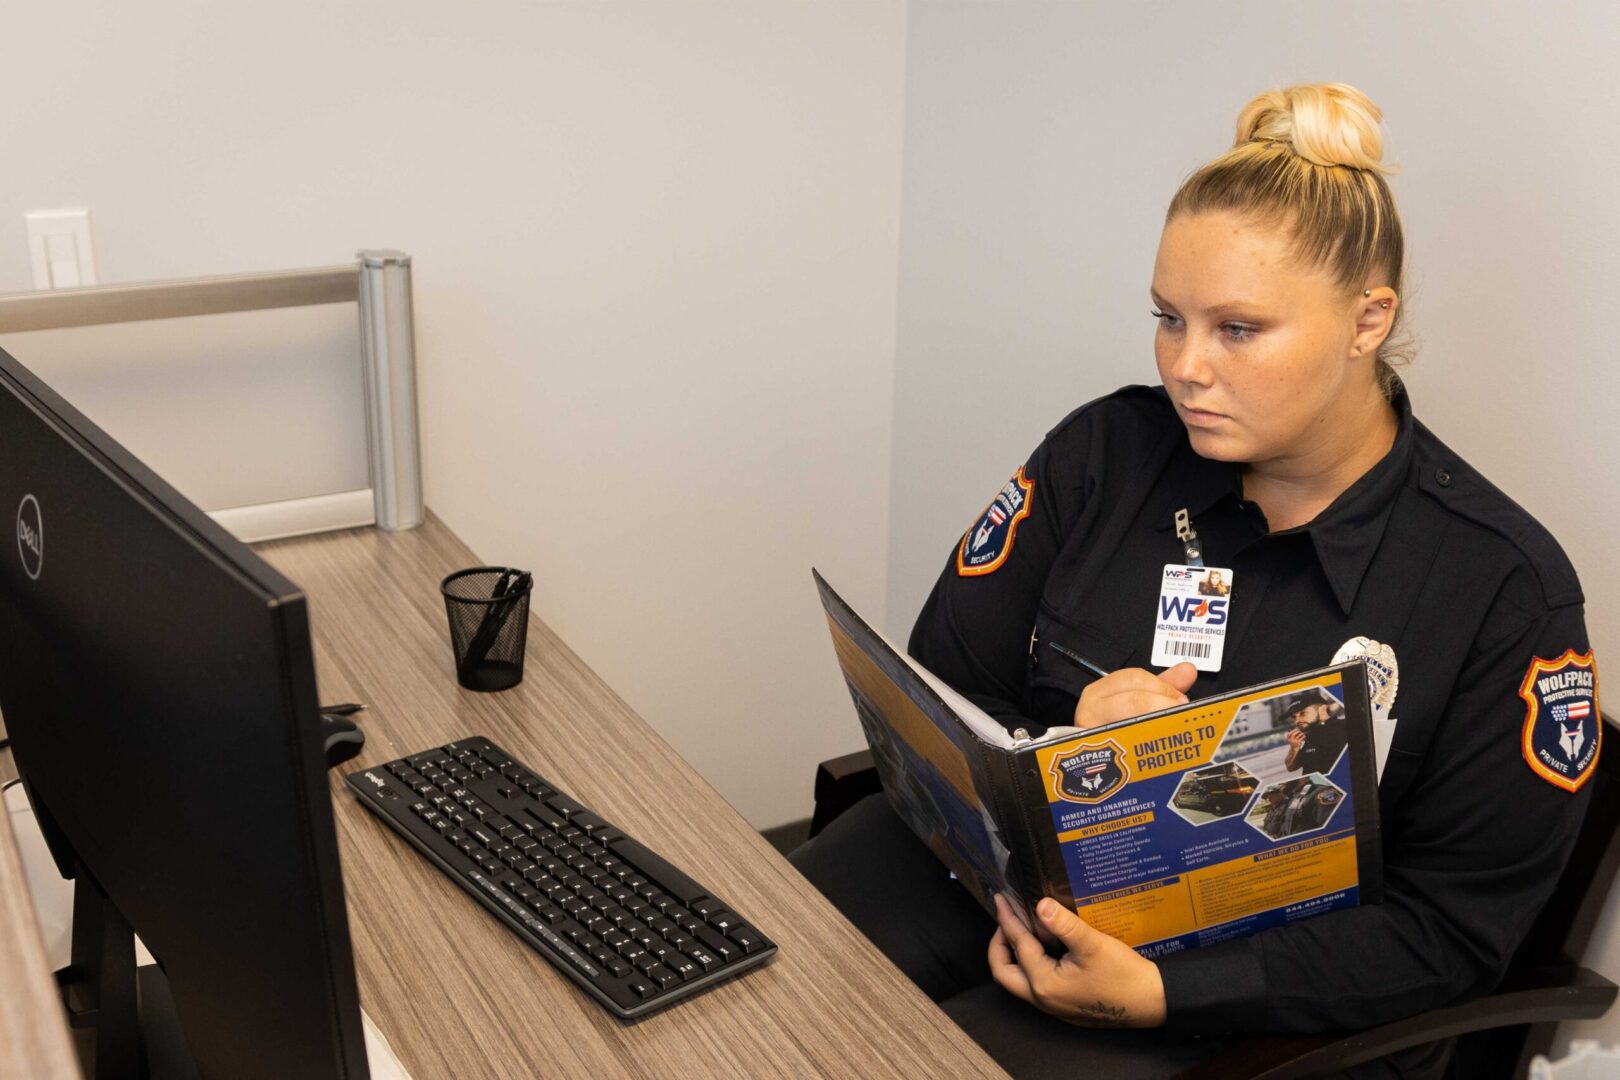 A Police Officer Sitting At Her Desk Reading.